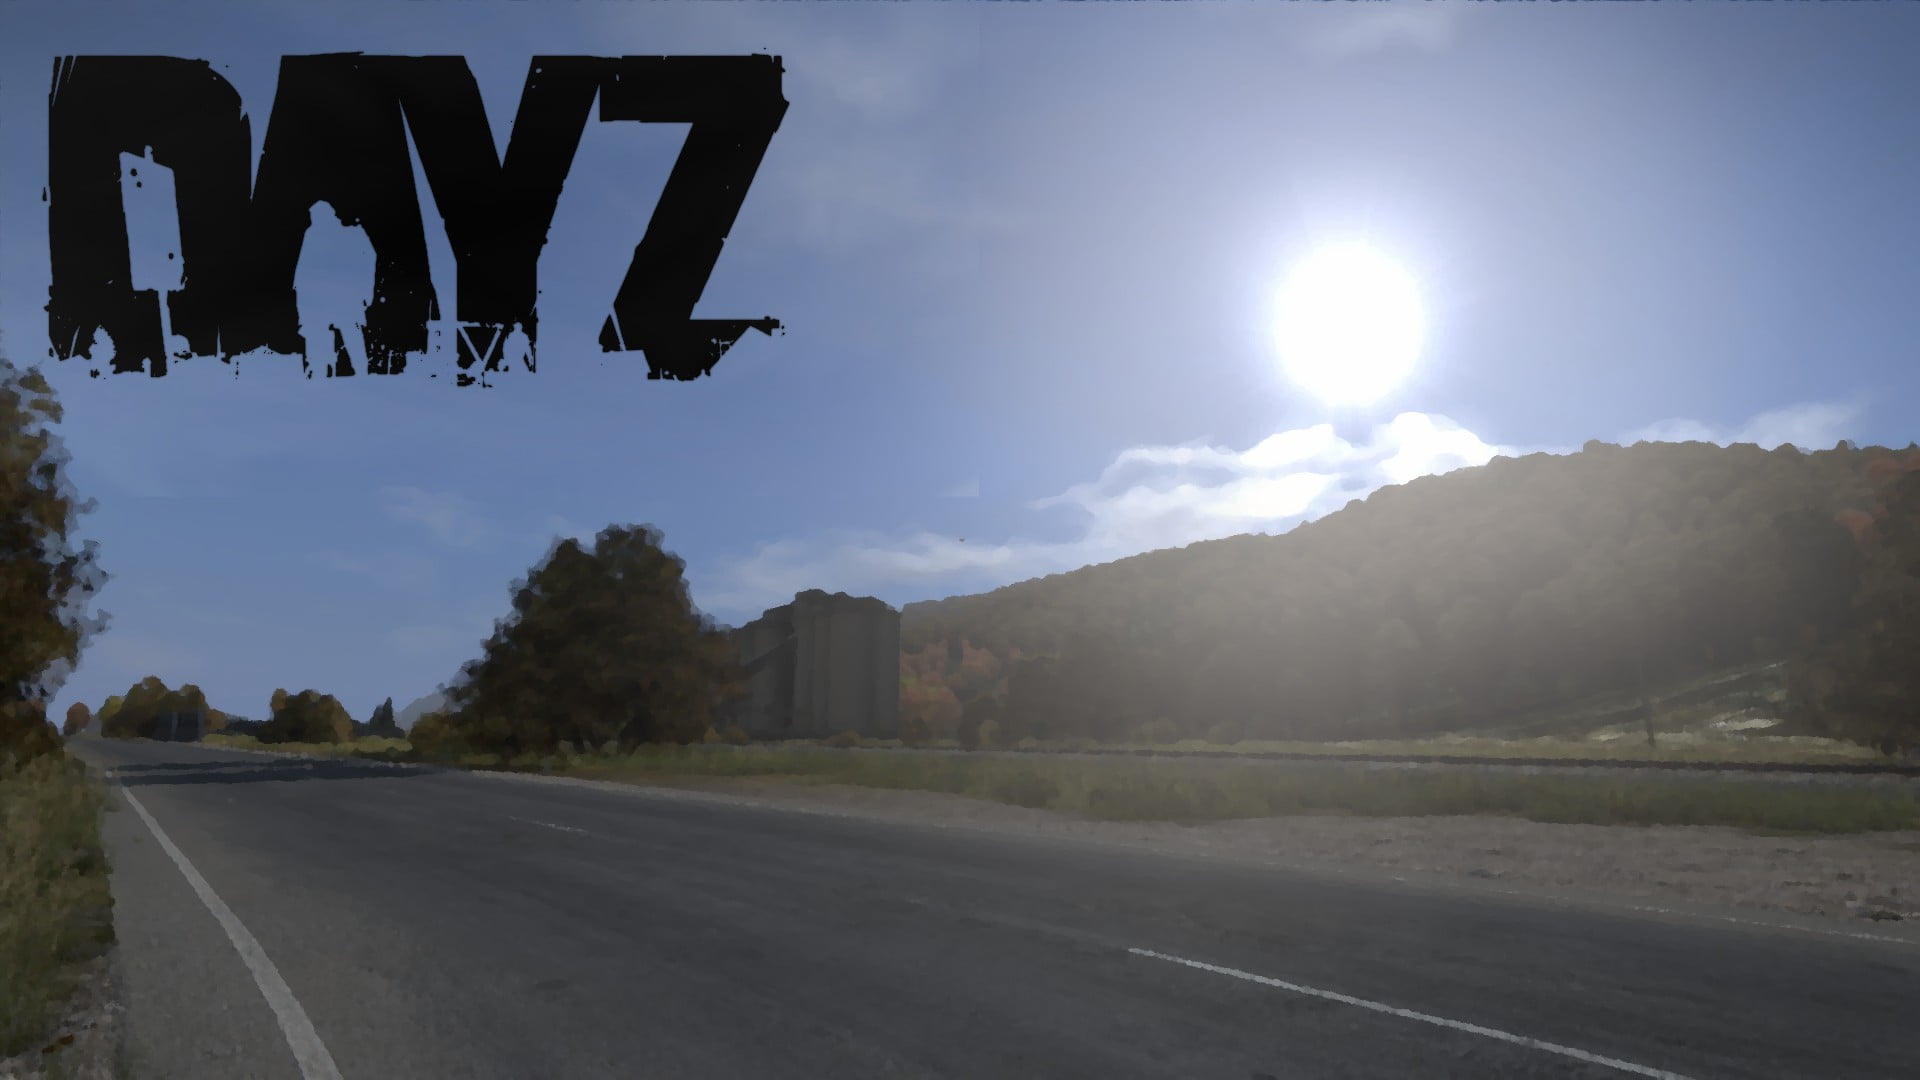 road background with Dayz text overlay, DayZ, Standalone, video games